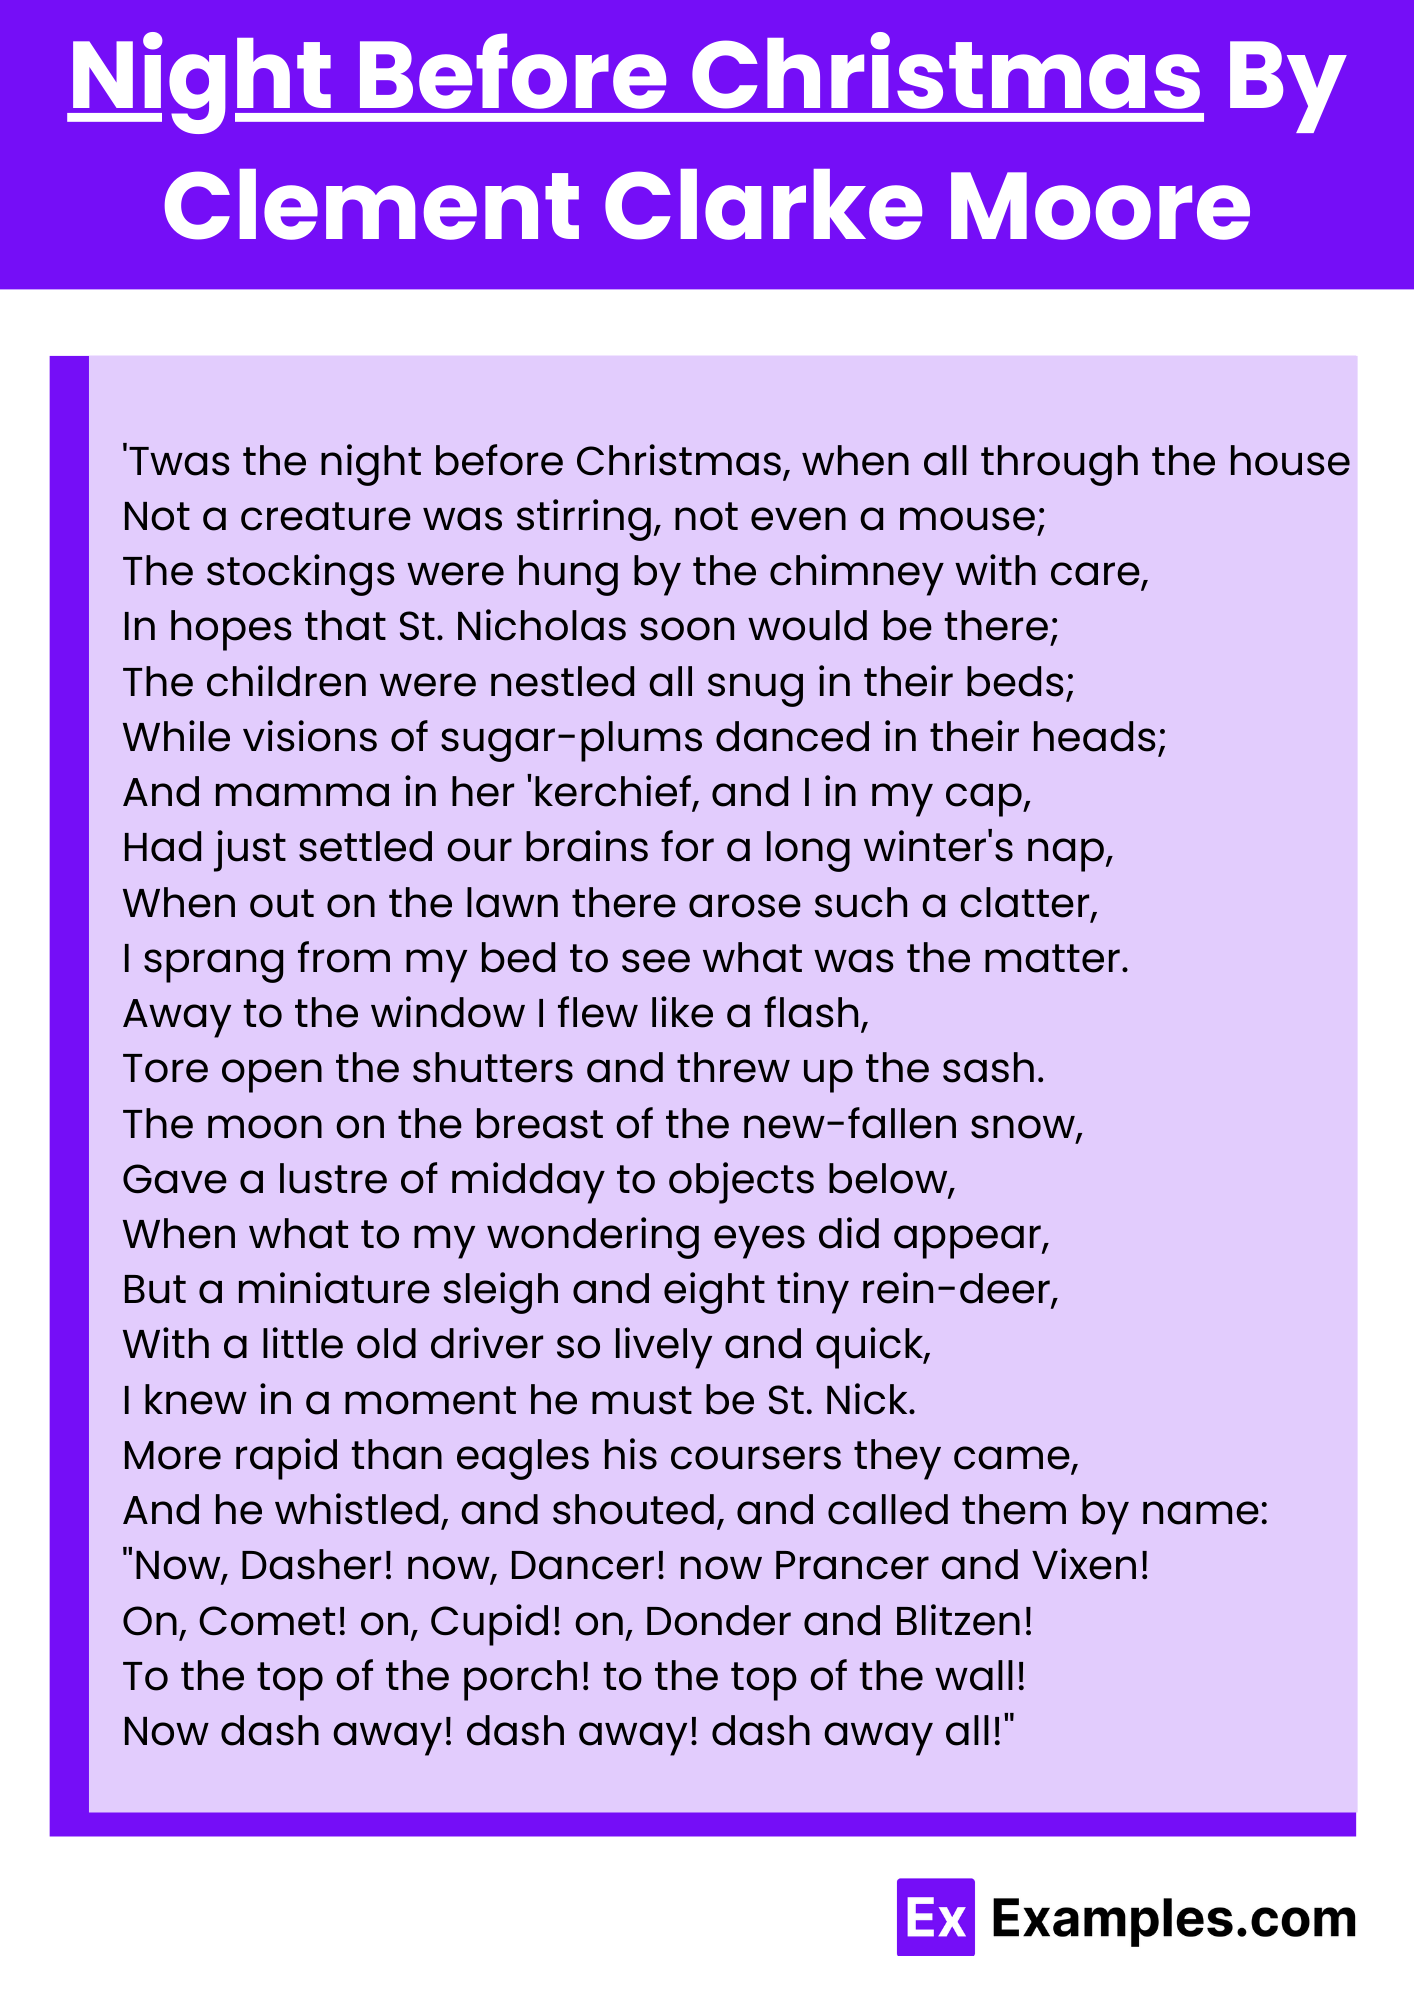 Night Before Christmas By Clement Clarke Moore